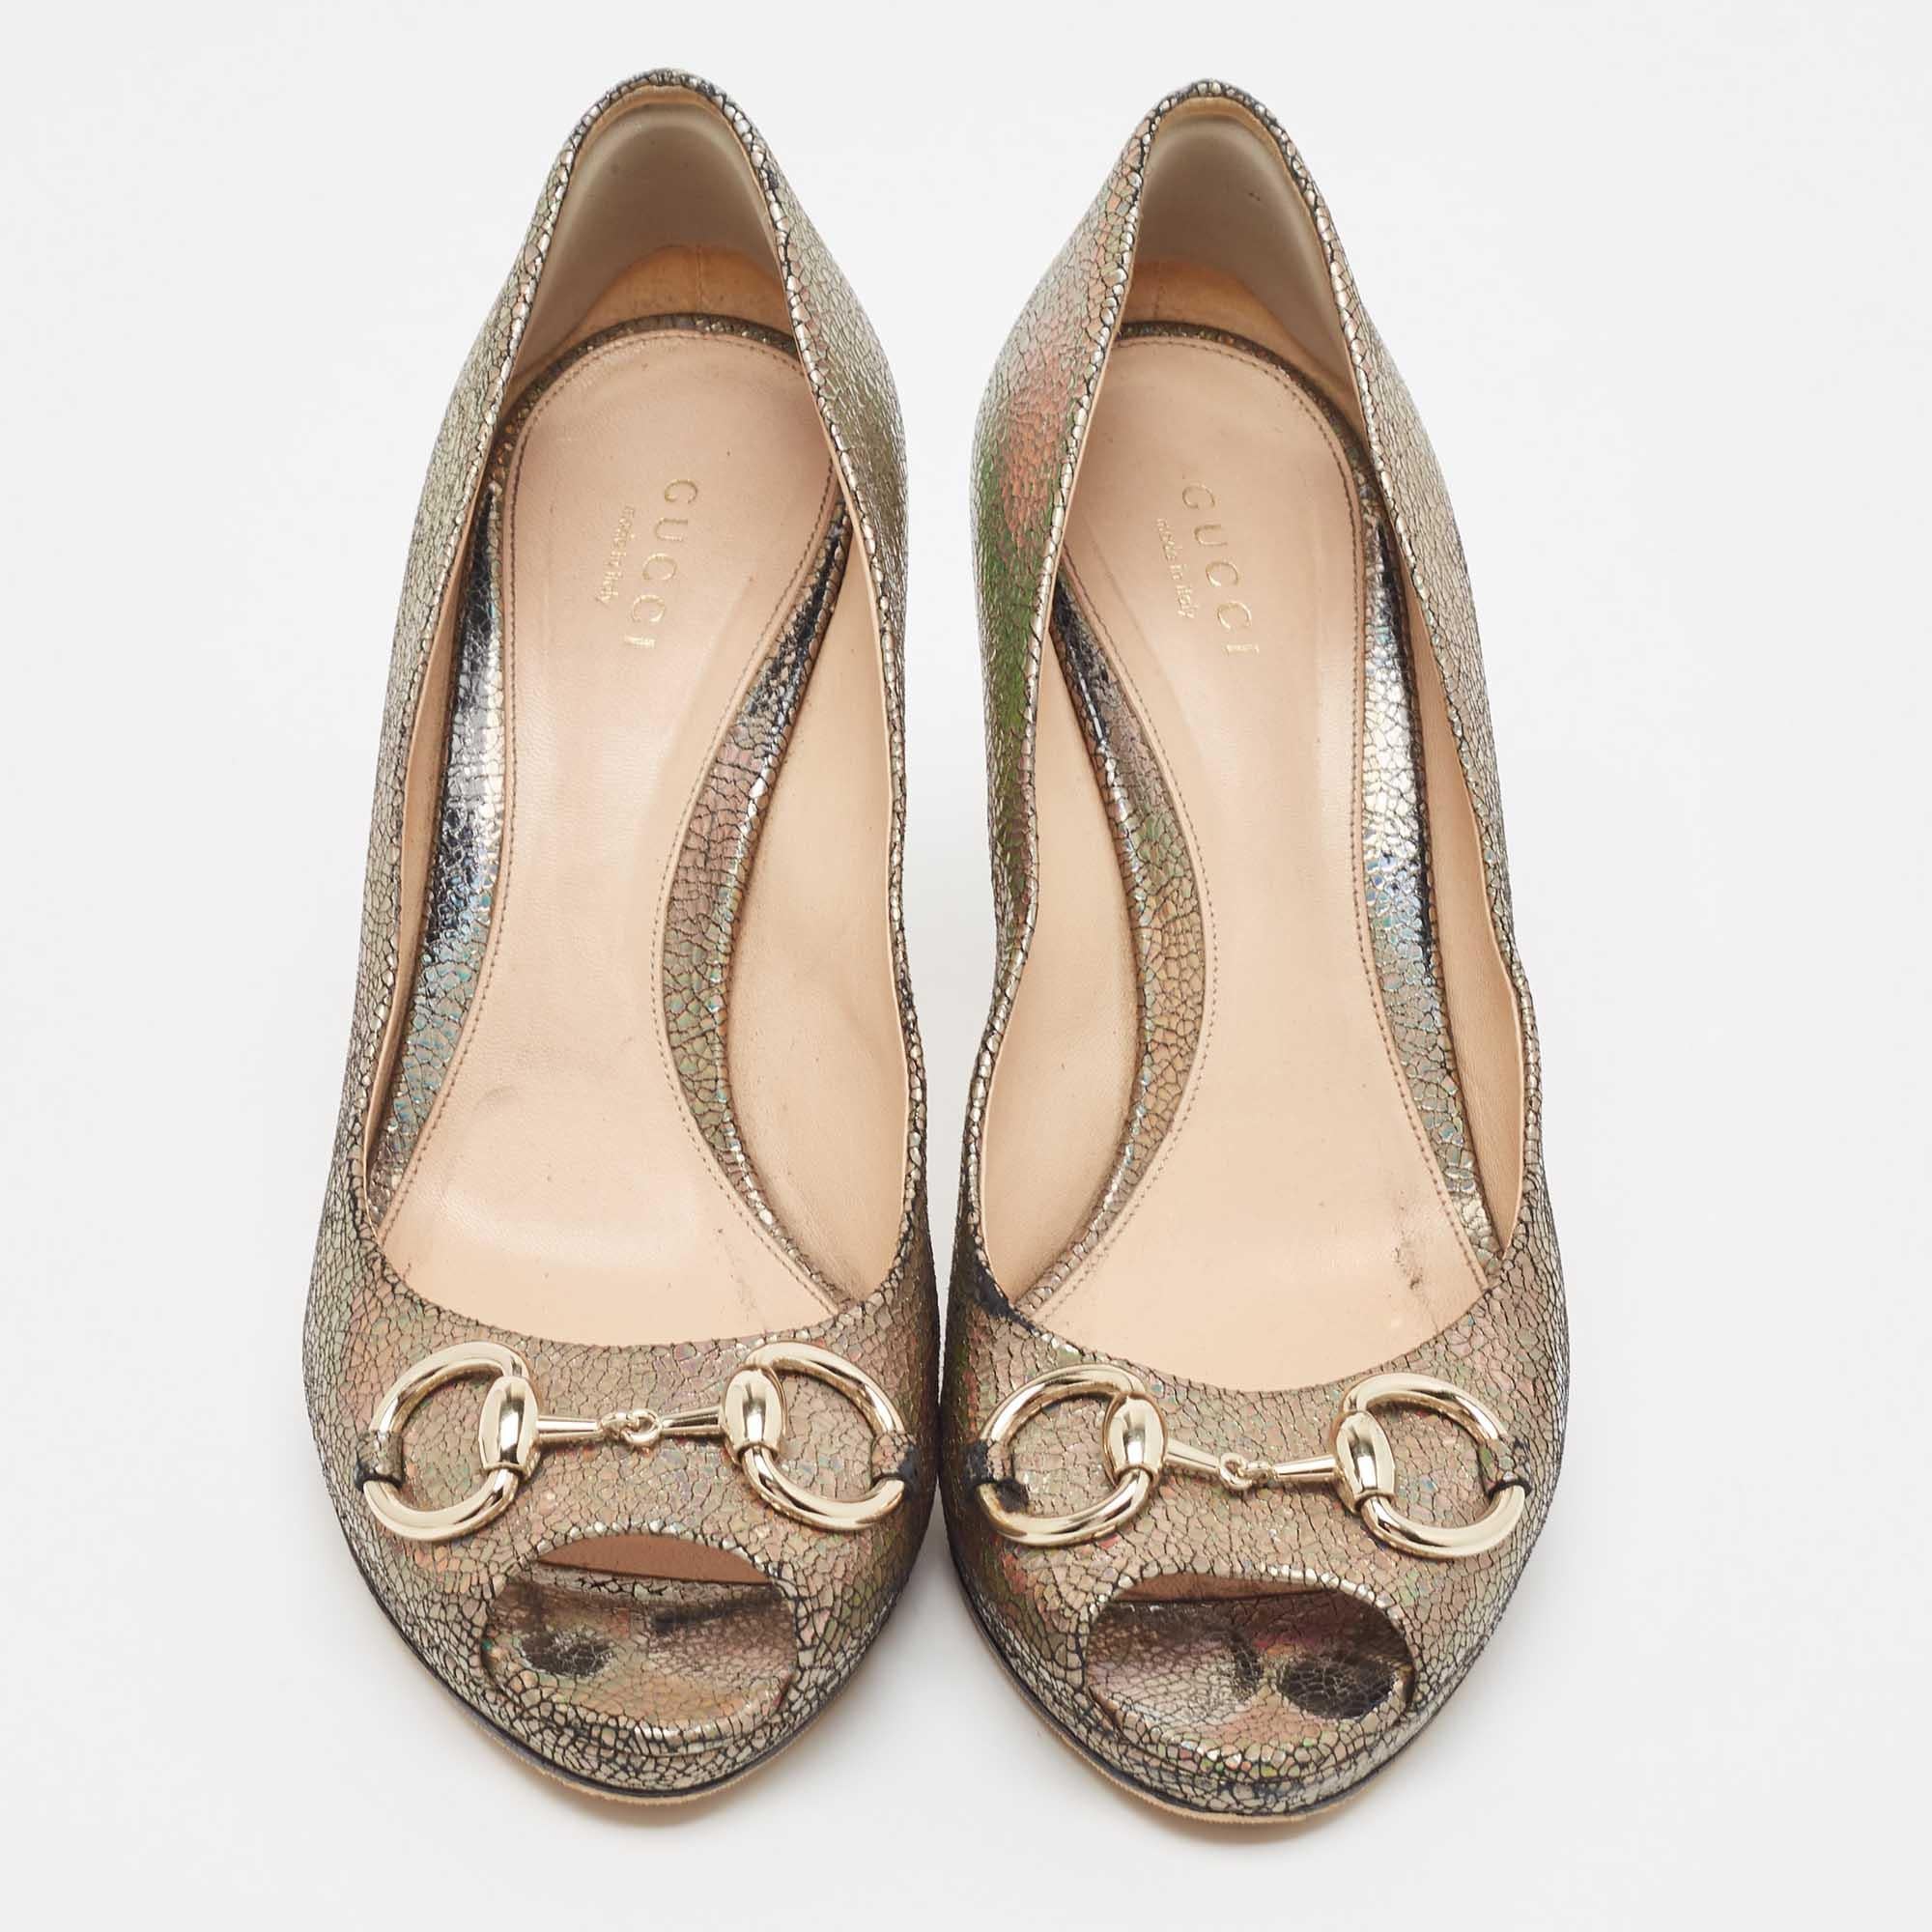 The fashion house’s tradition of excellence, coupled with modern design sensibilities, works to make these Gucci pumps a fabulous choice. They'll help you deliver a chic look with ease.

